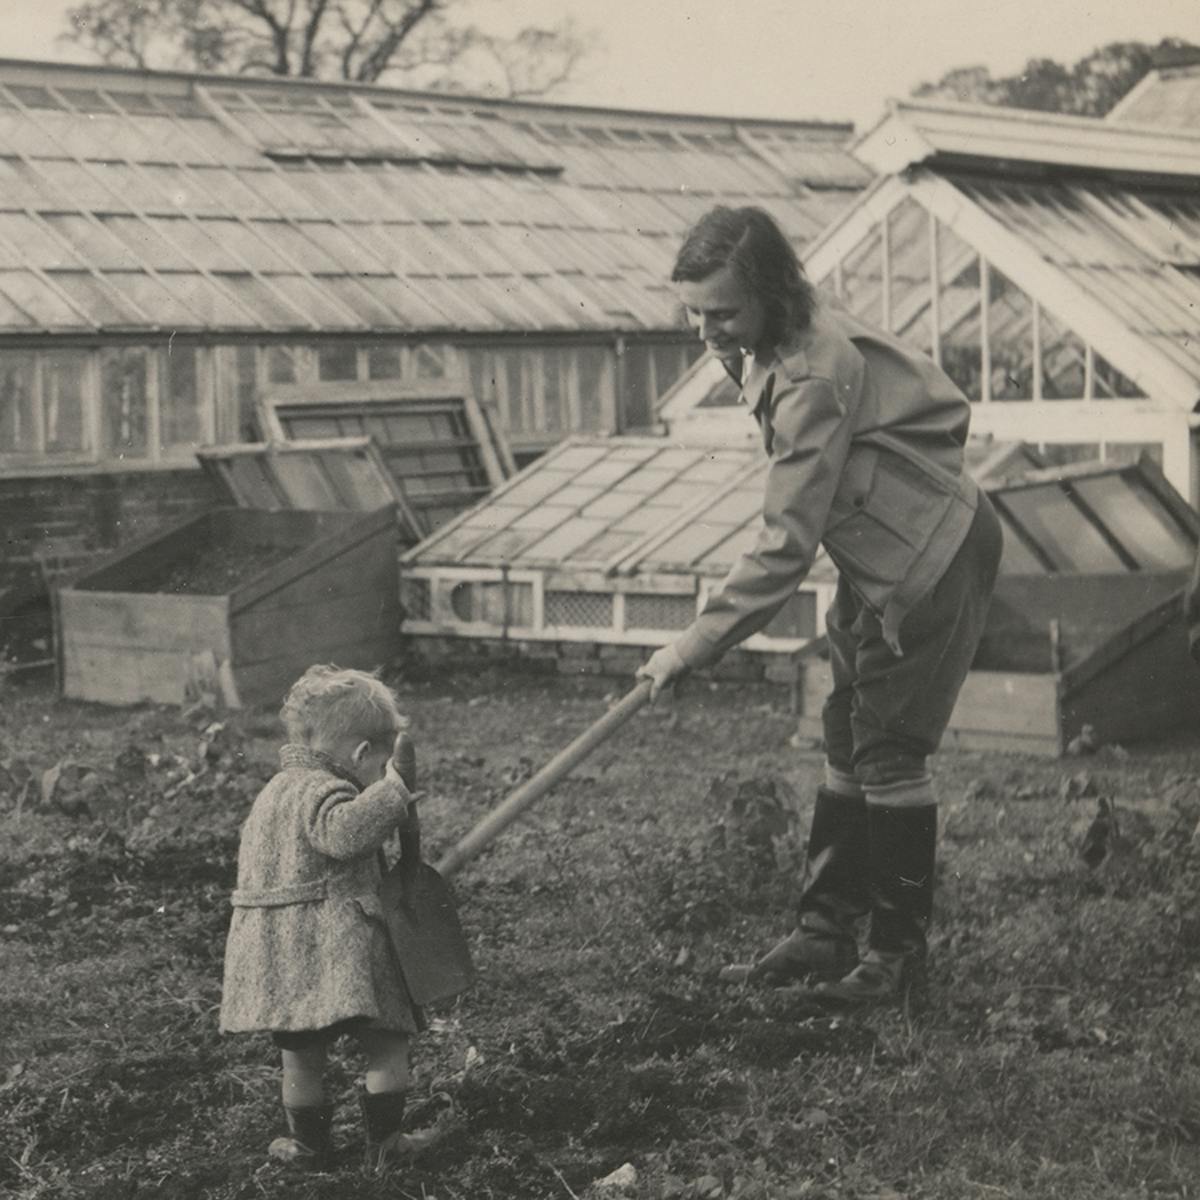 Black and white photograph showing three women hoeing some land, with a small child in the foreground holding a large trowel. Two large glasshouses stand behind them.